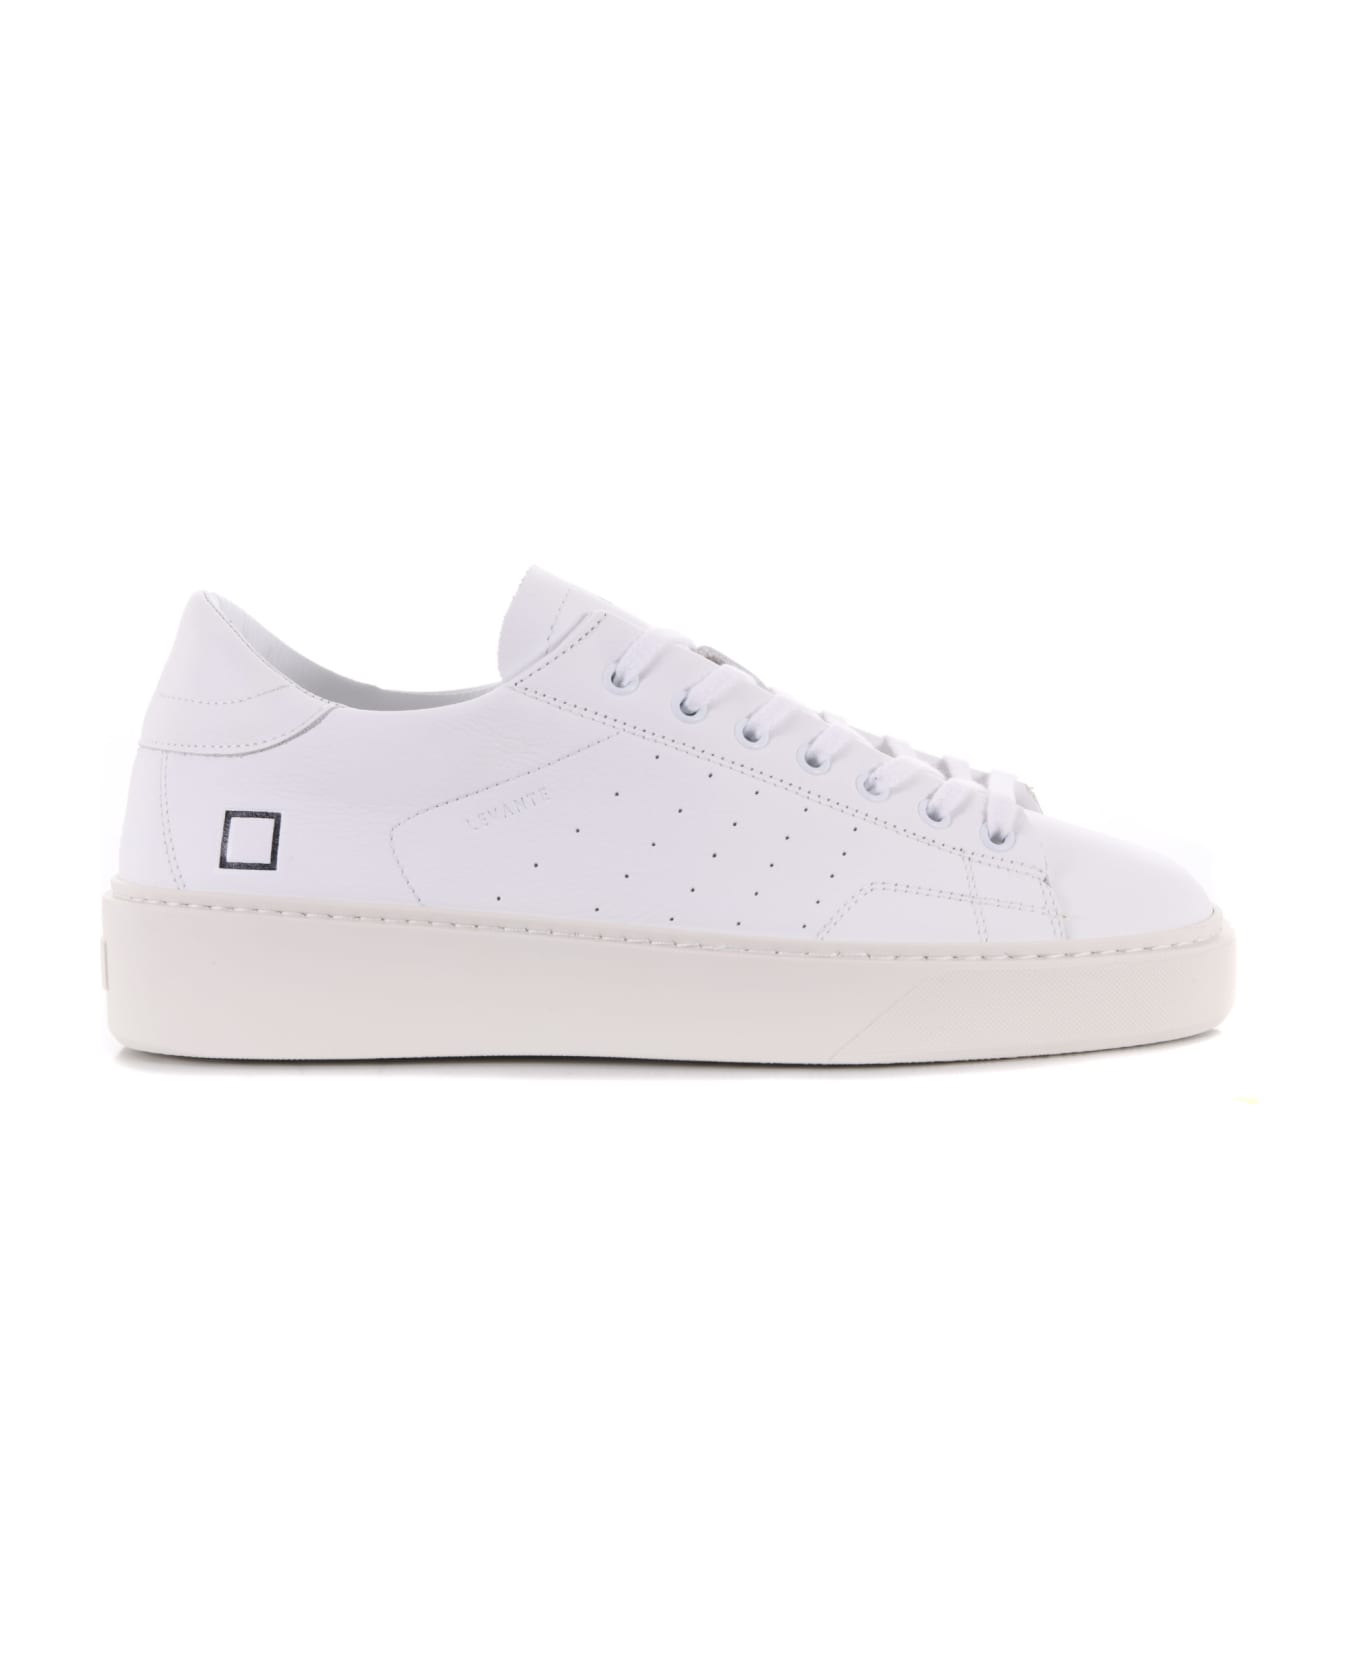 D.A.T.E. Men's Sneakers "sonica Calf" In Leather - Bianco スニーカー